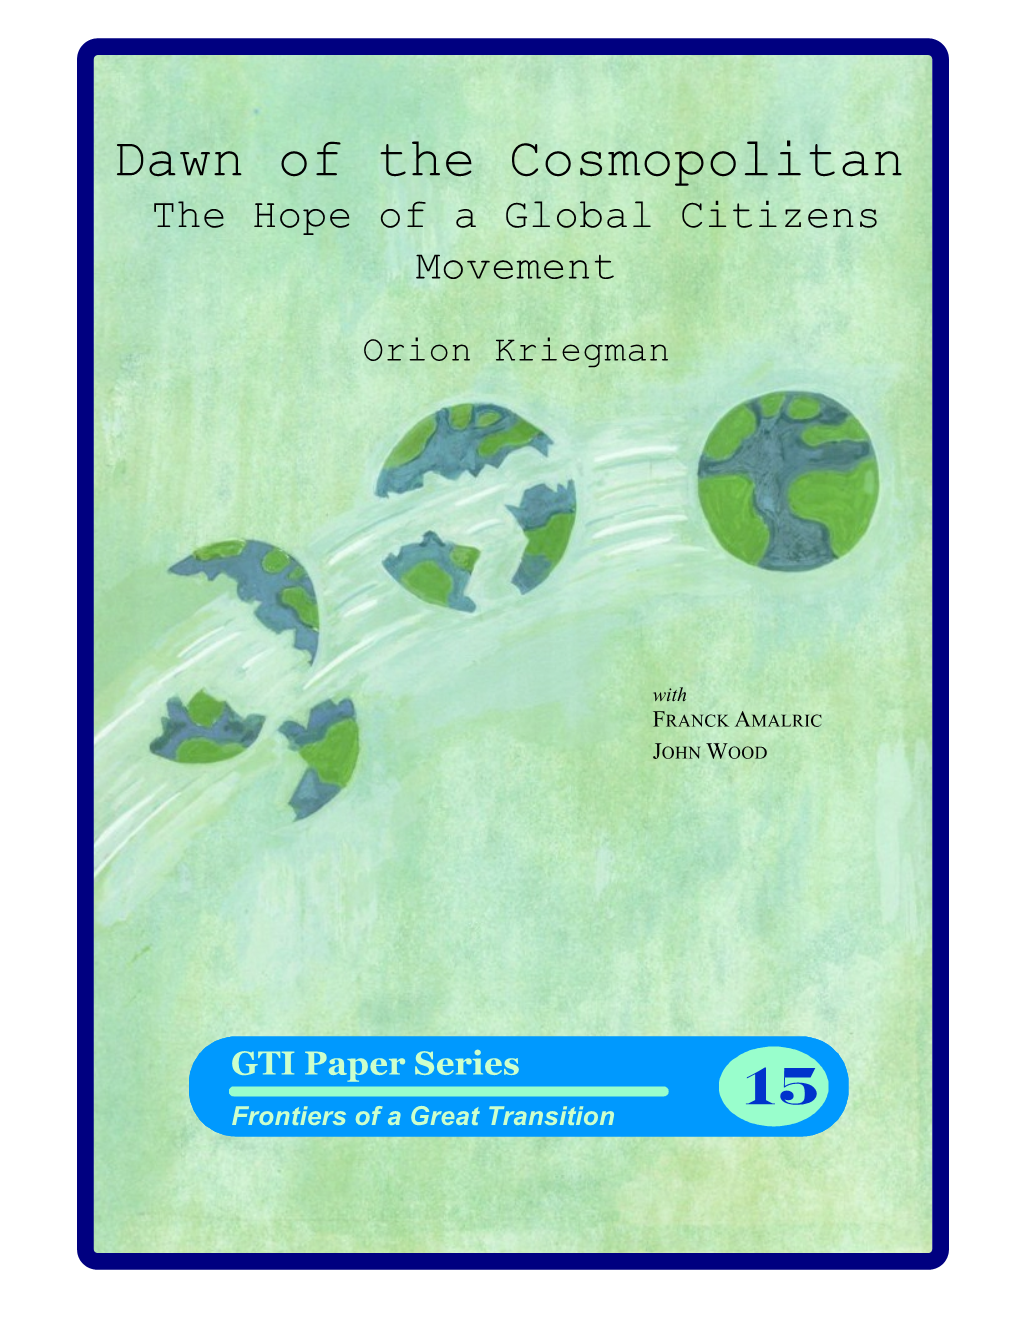 Dawn of the Cosmopolitan: the Hope of a Global Citizens Movement (Kriegman) Prospects for a Global Movement and What It Might Look Like 16